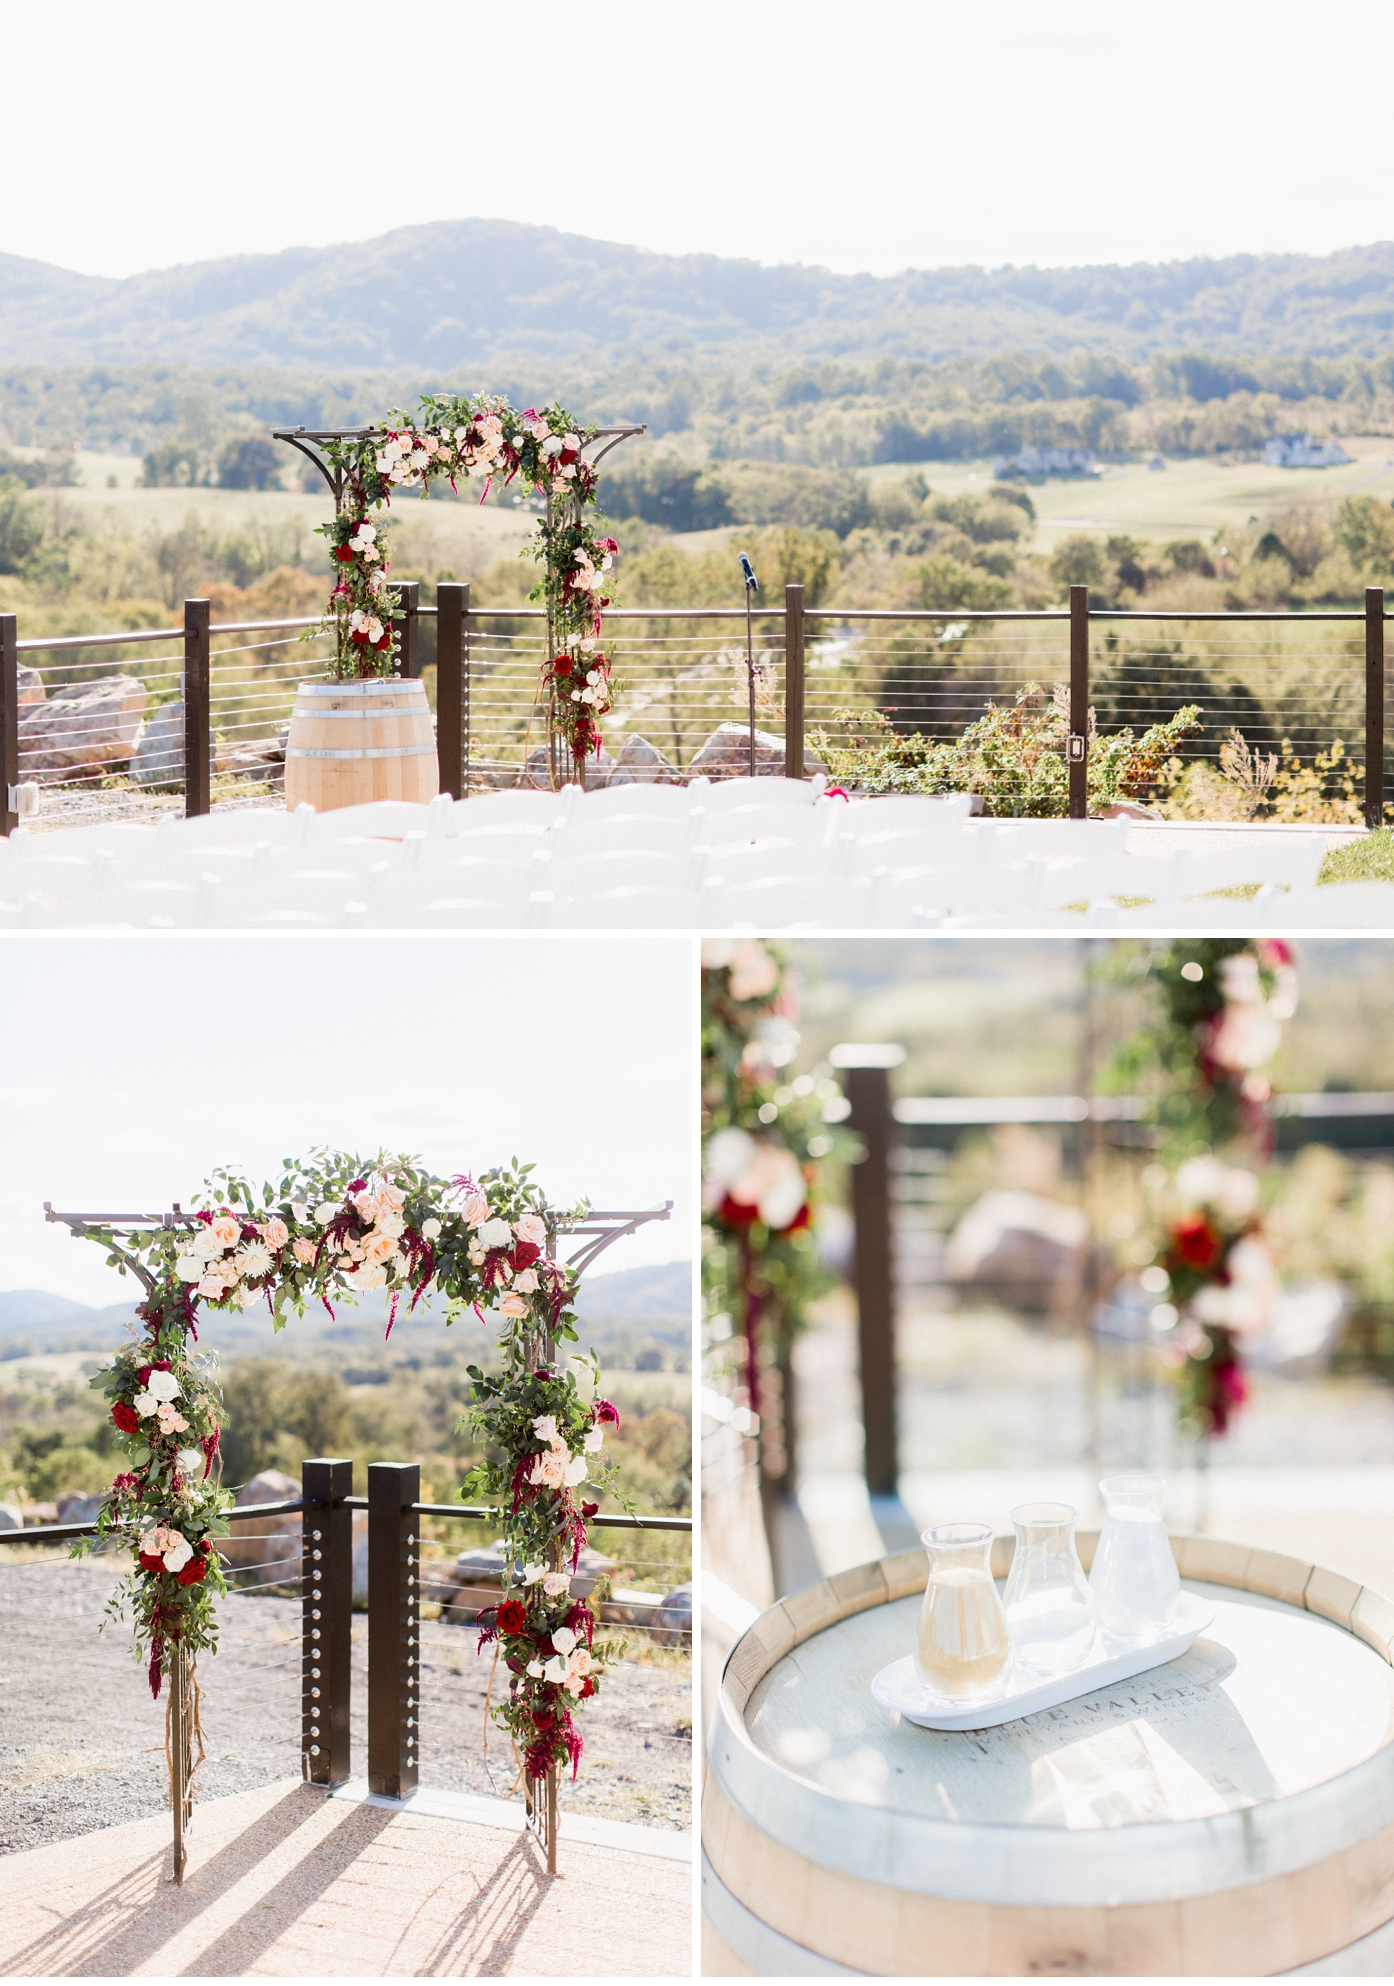 Ceremony at Blue Valley Vineyard and Winery by Alisandra Photography